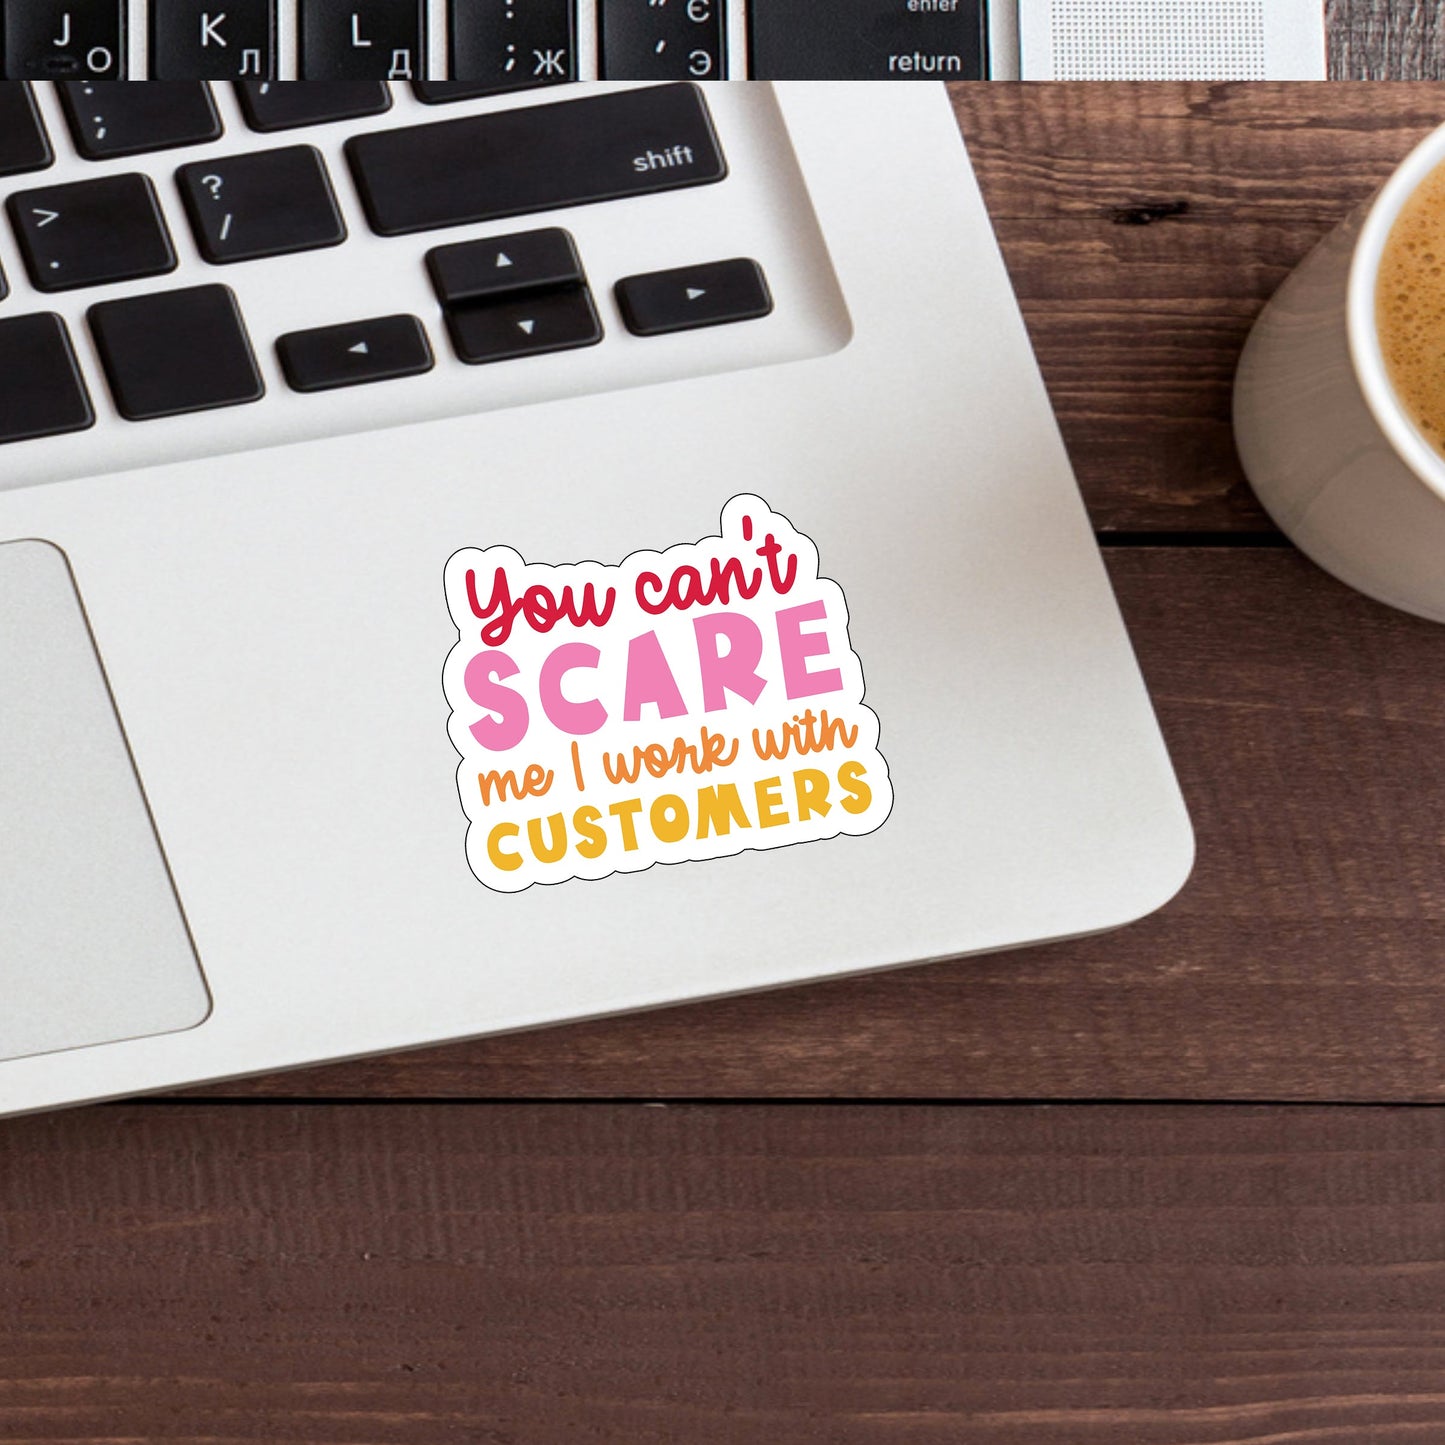 You cant scare me I work with customers  Sticker,  Vinyl sticker, laptop sticker, Tablet sticker